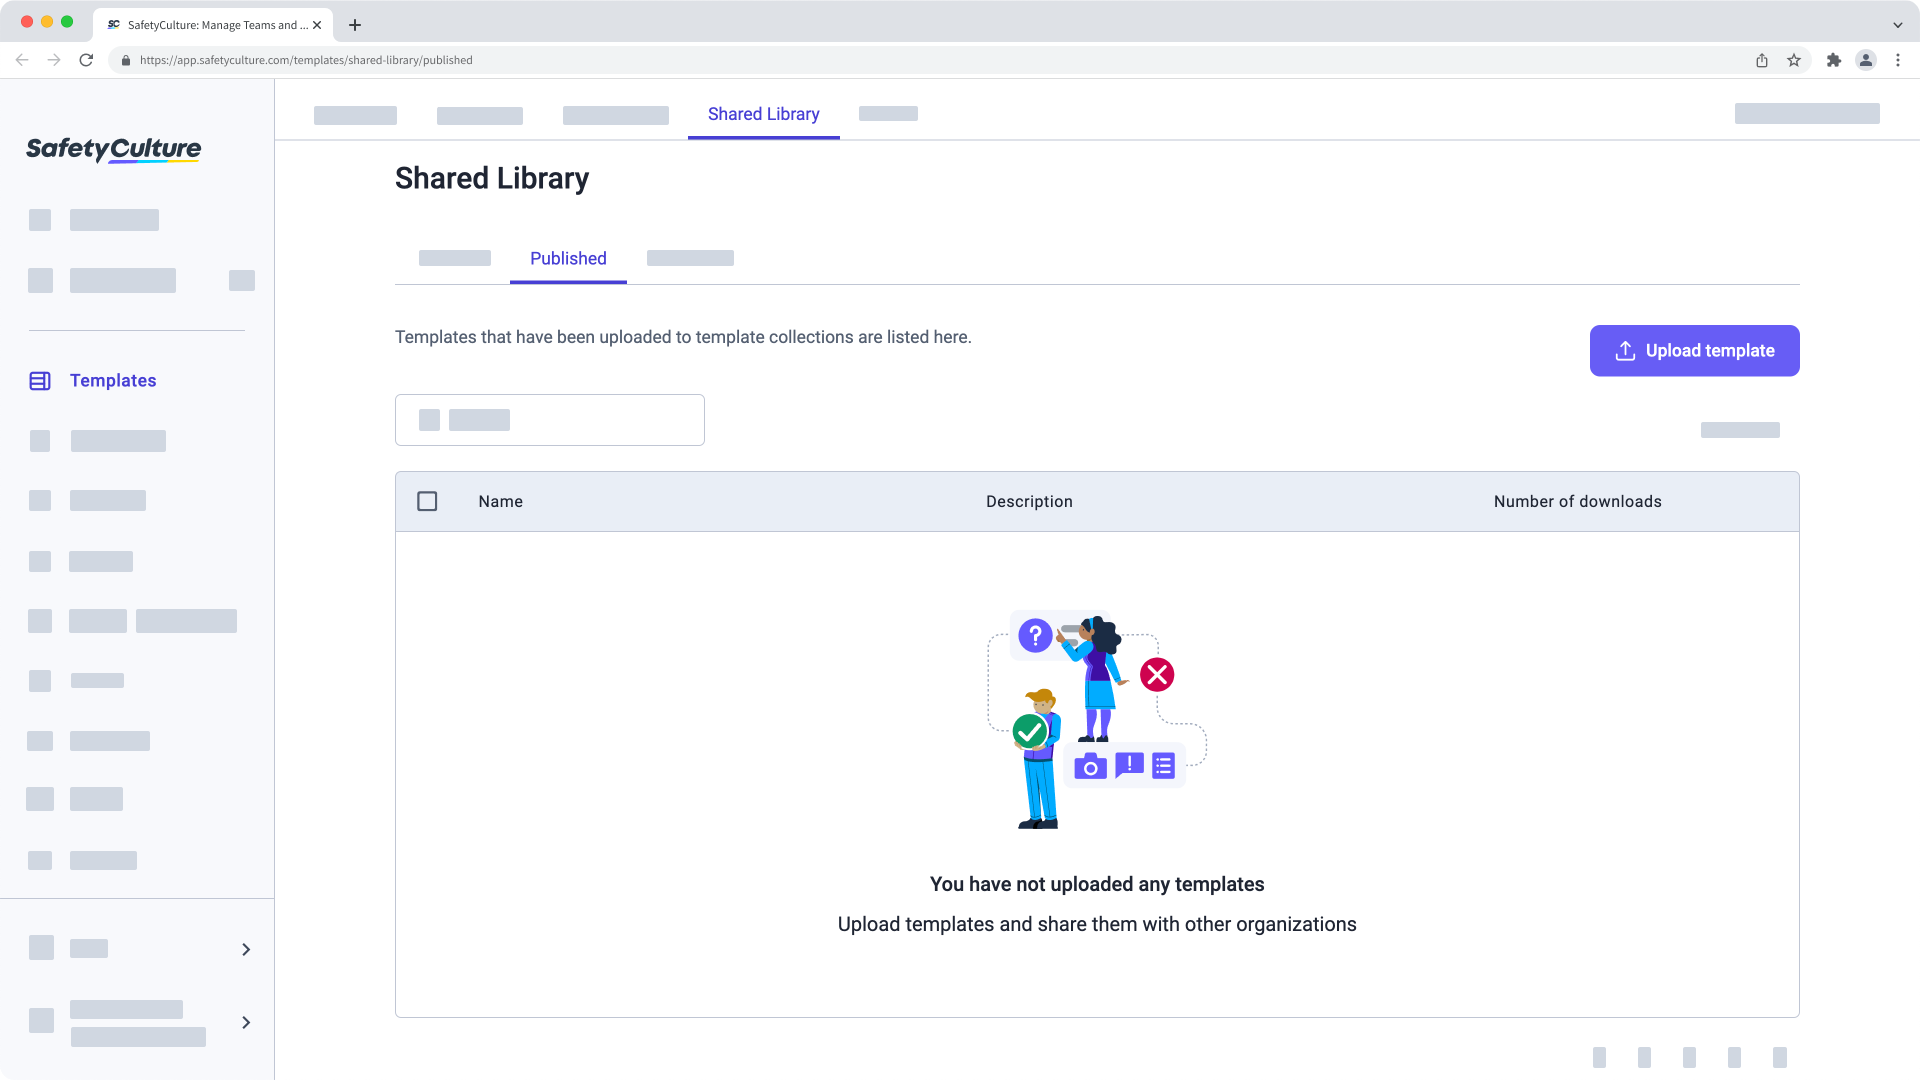 Upload a template to your organization's Shared Library via the web app.